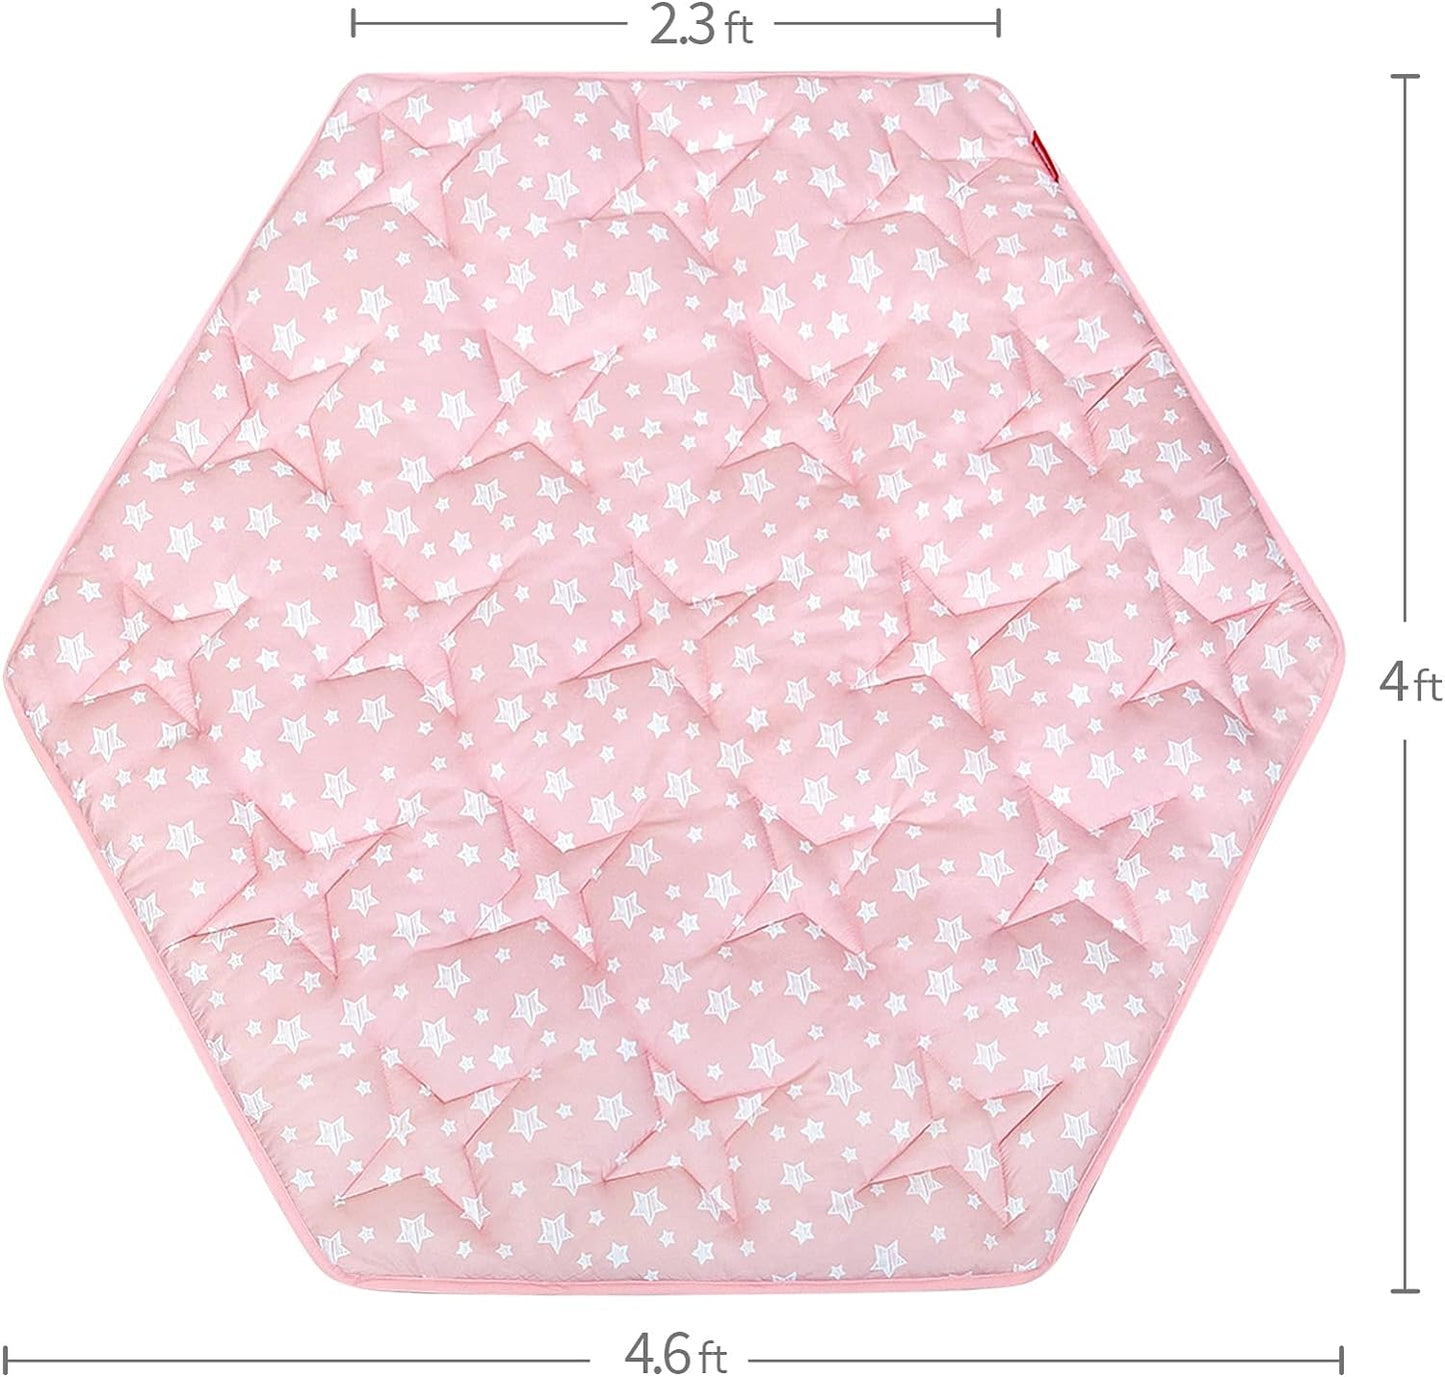 Baby Play Mat | Play Tent Mat - Hexagon 55" x 47", Fitted for Monobeach Princess Tent Large Playhouse Kids Castle Play Tent, Pink Star